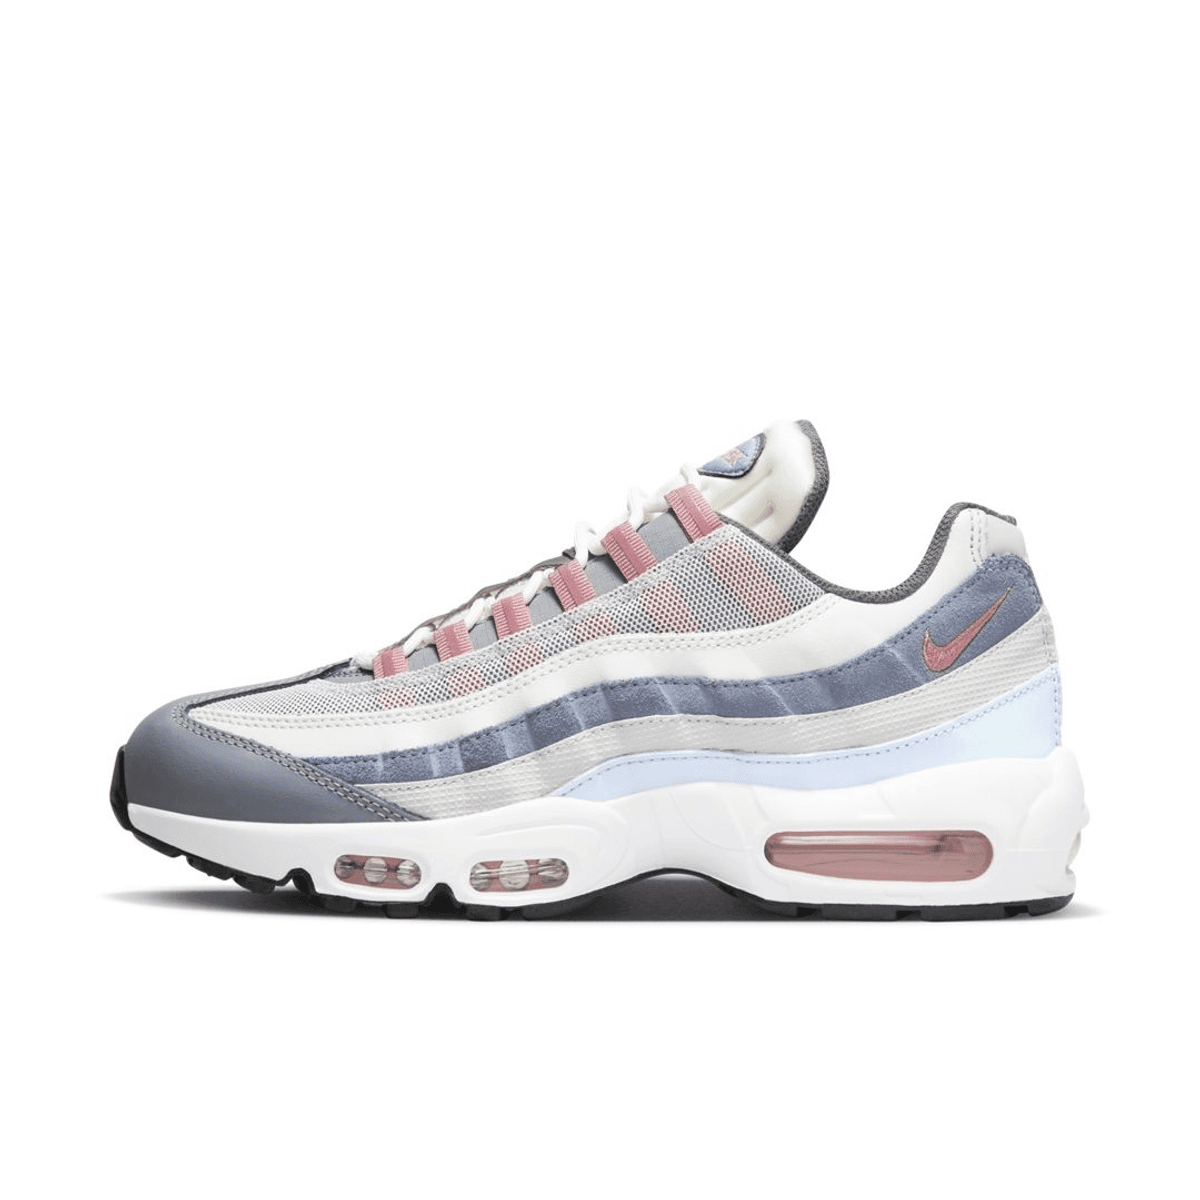 Air Max 95 Red Stardust Brings Some Cherry Blossom Vibes